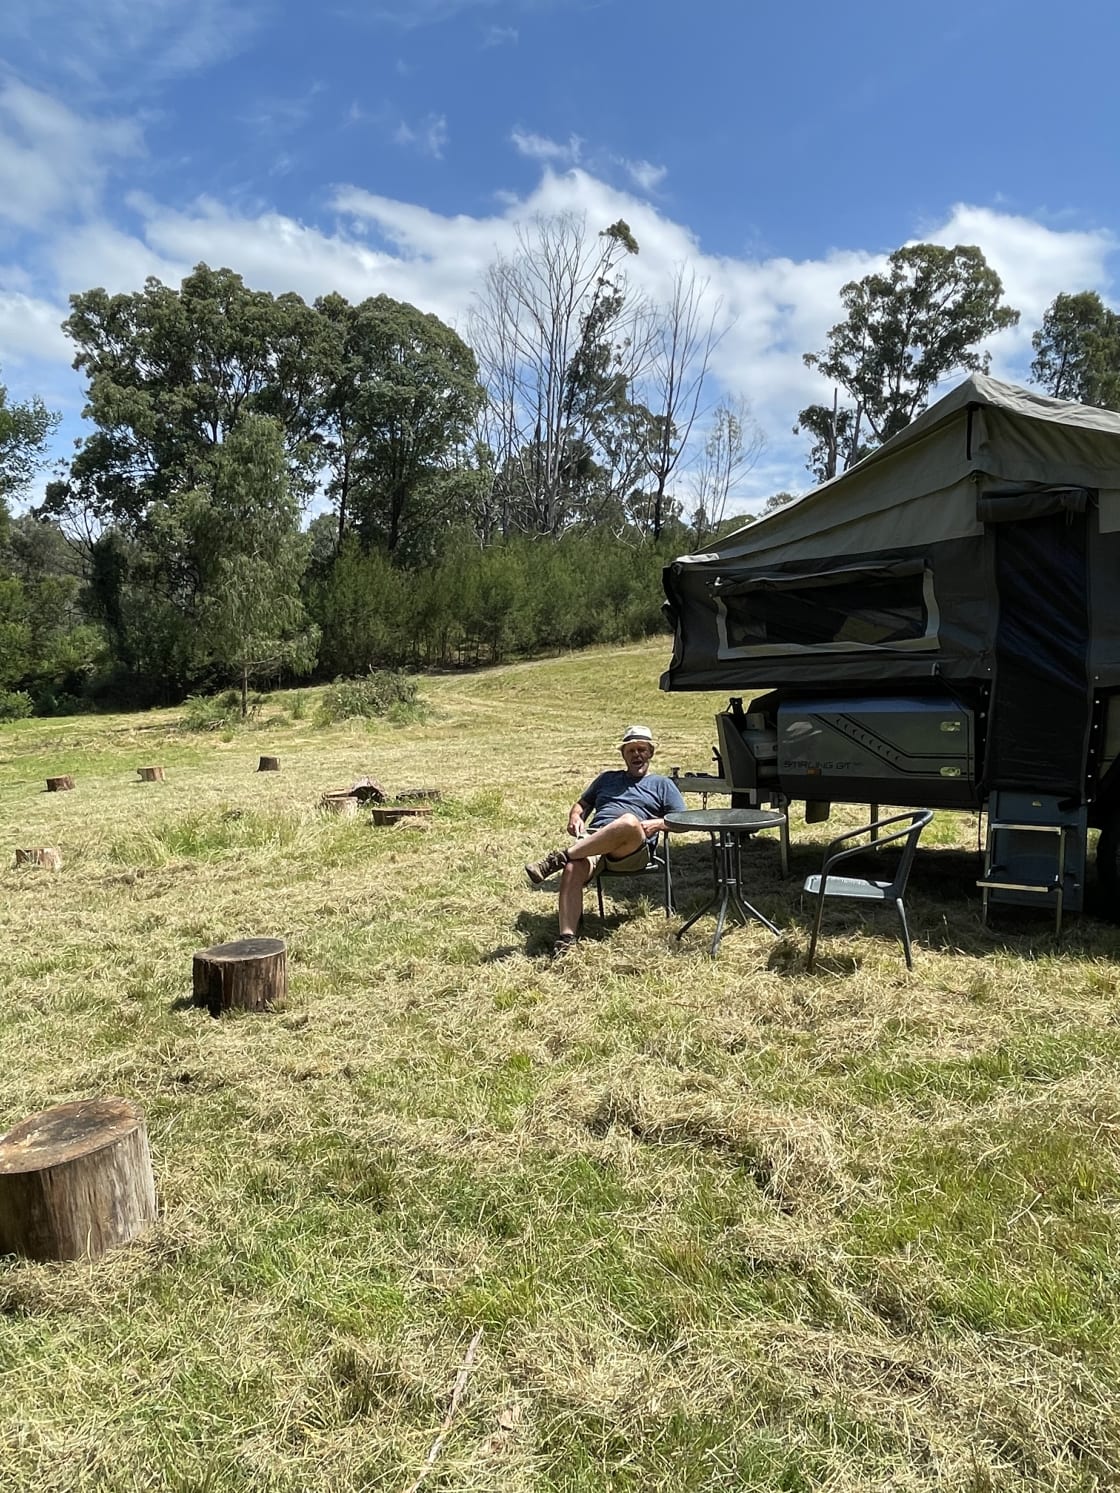 Camp site at bottom of a paddock